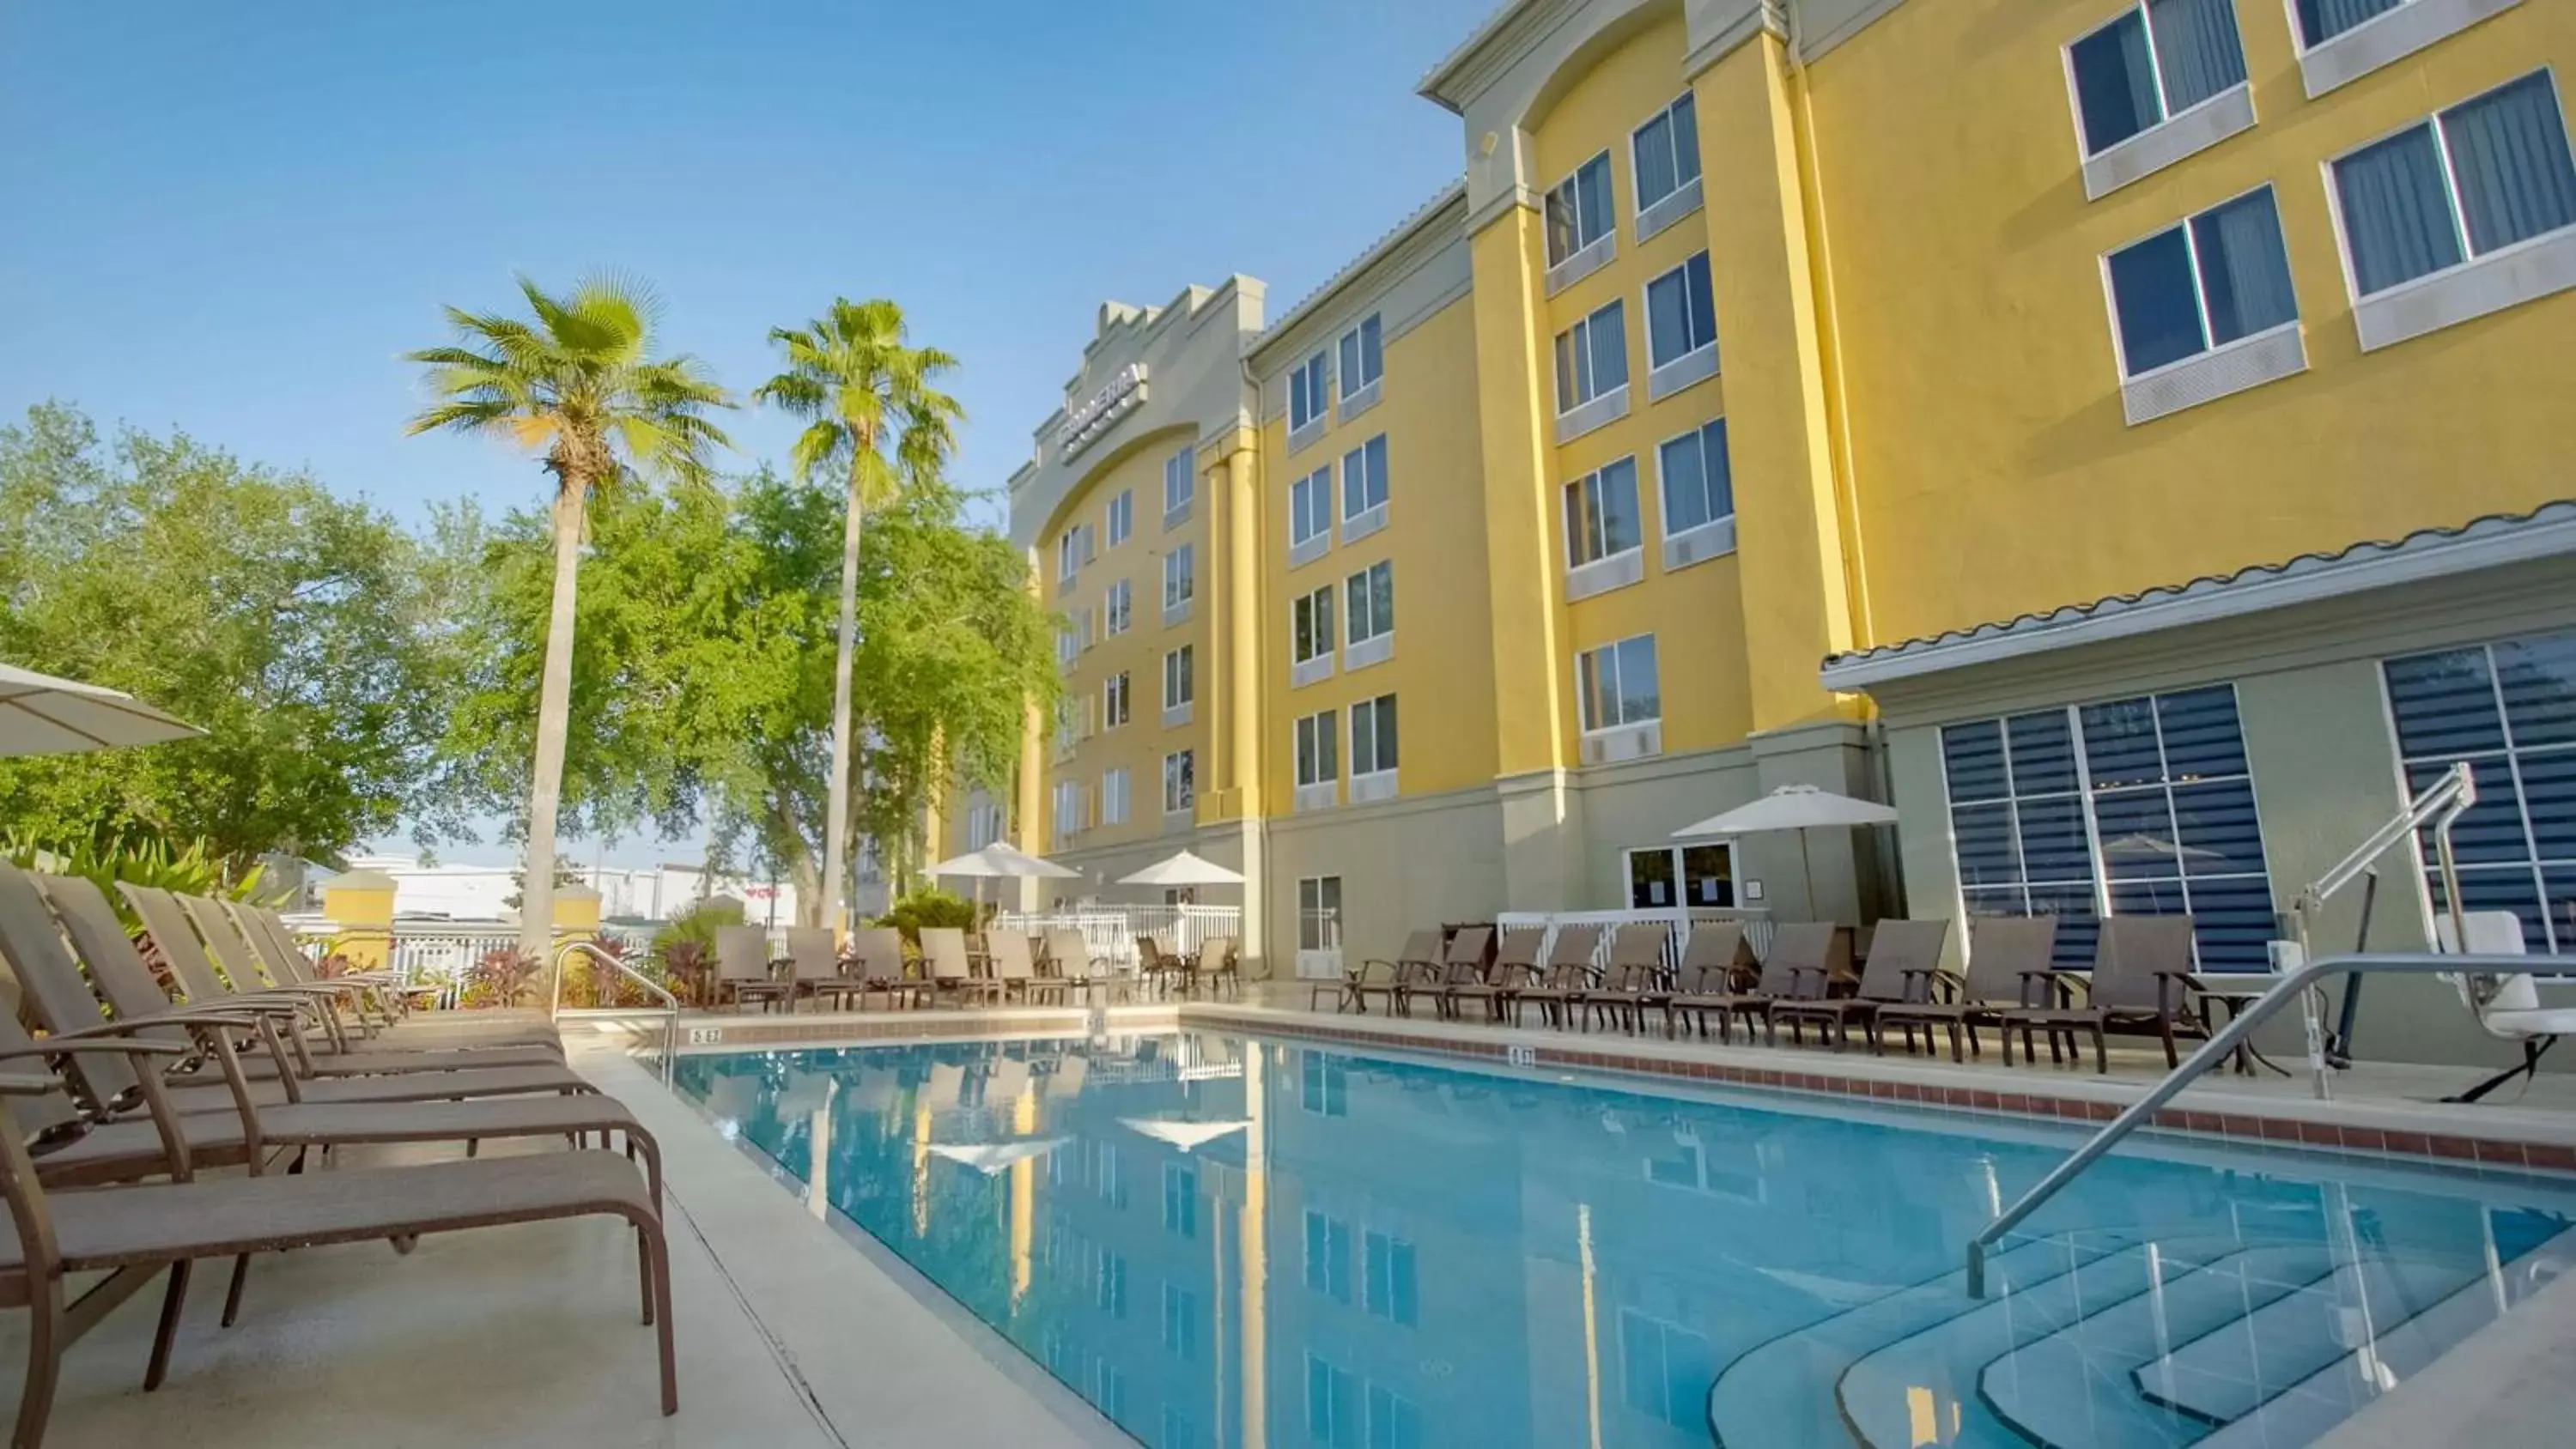 Property building, Swimming Pool in Galleria Palms Orlando